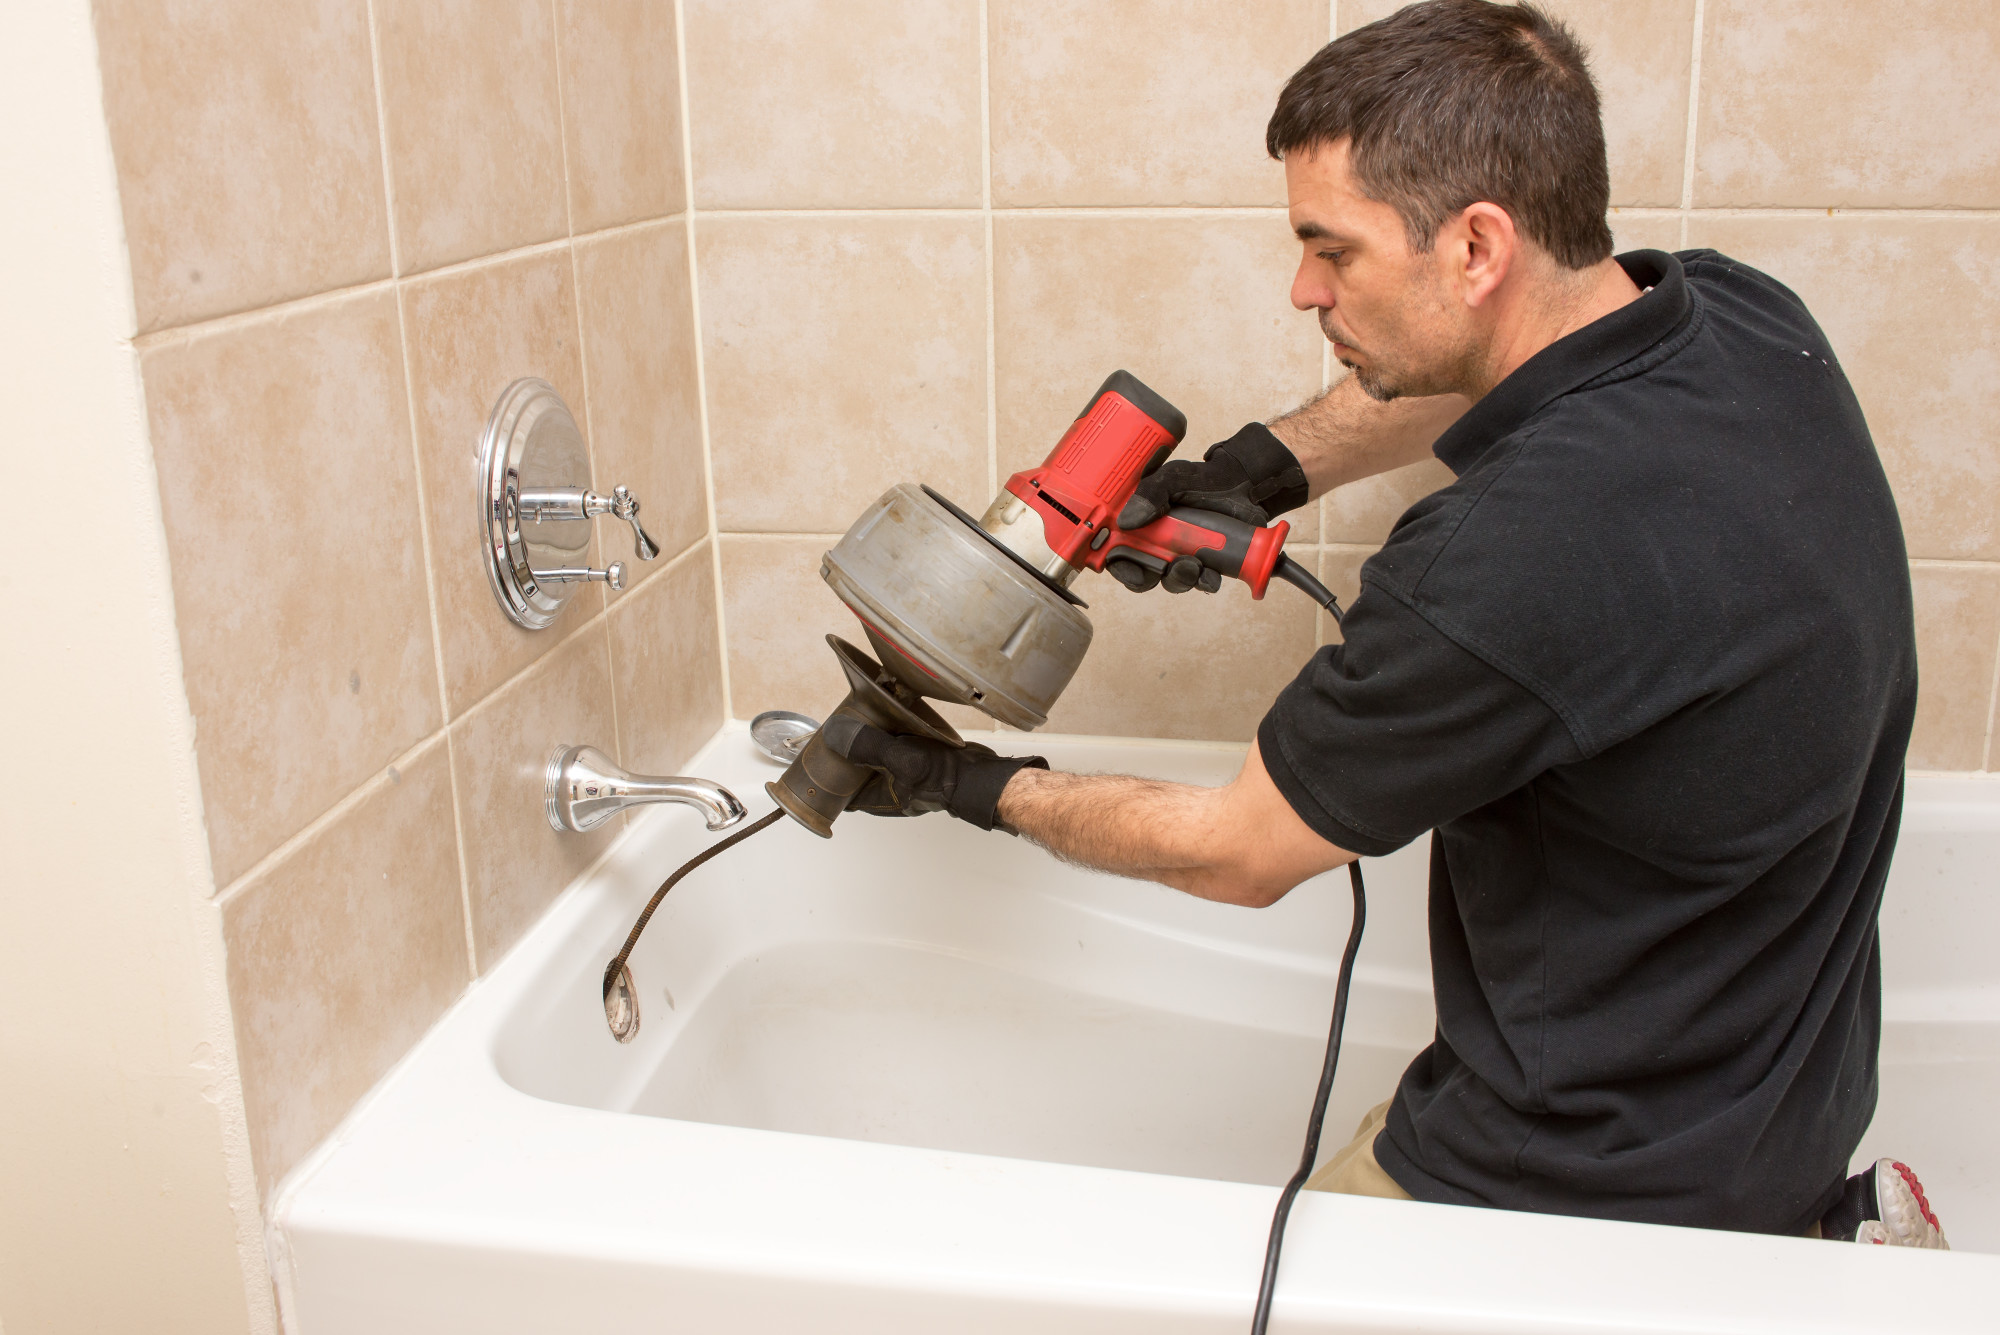 Plumbing Problems: Is Residential Plumbing Better Than Commercial?